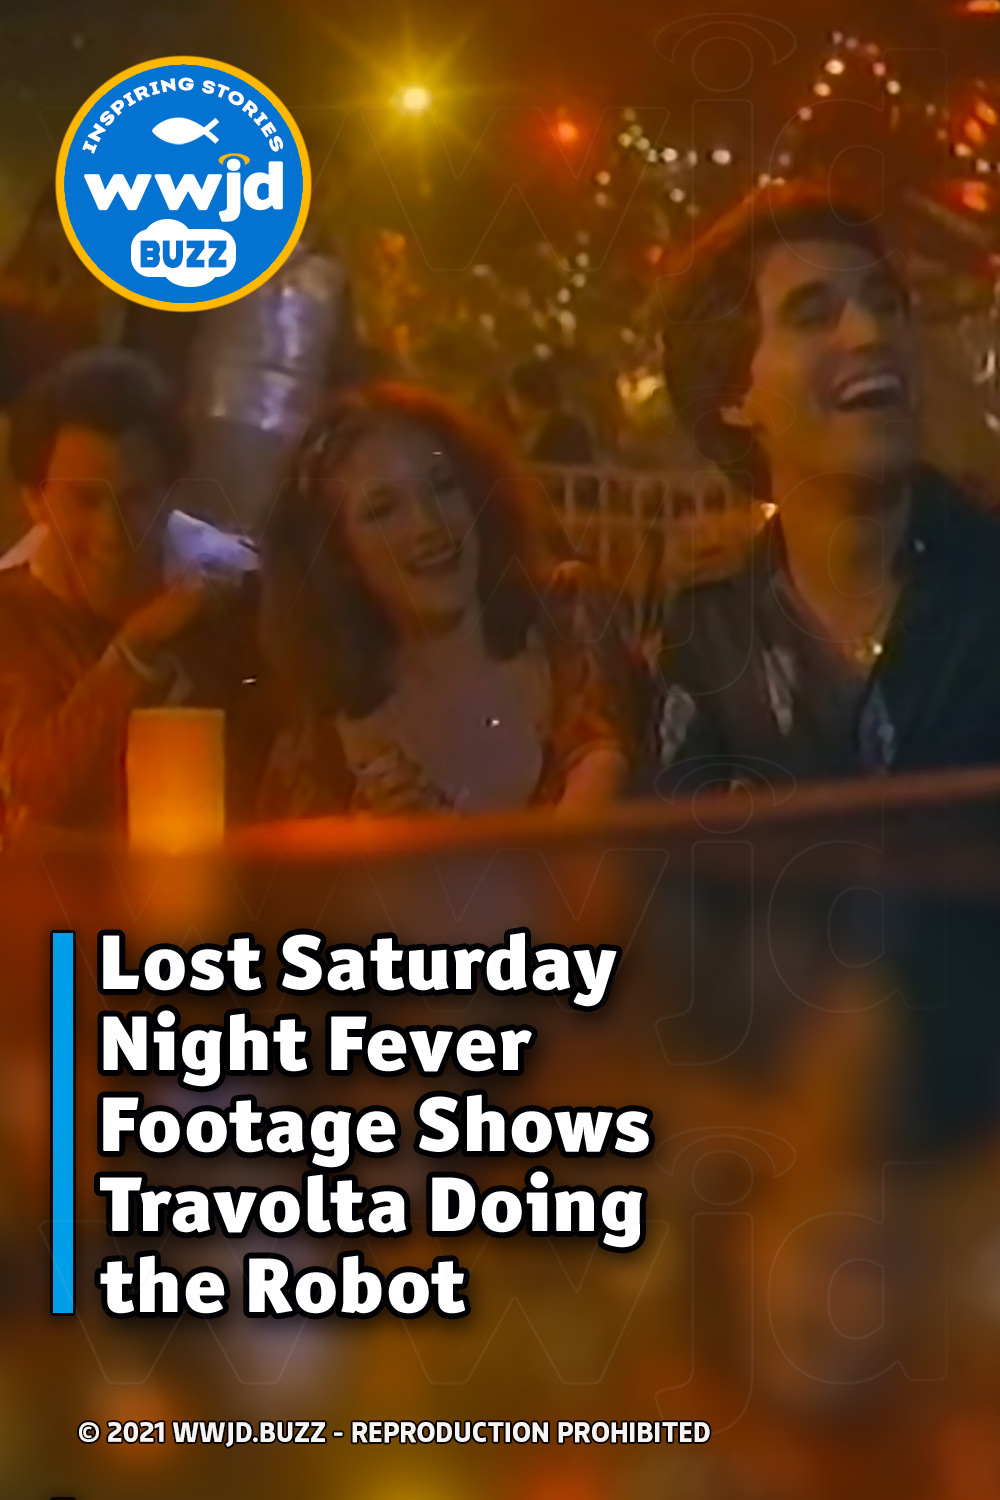 Lost Saturday Night Fever Footage Shows Travolta Doing the Robot